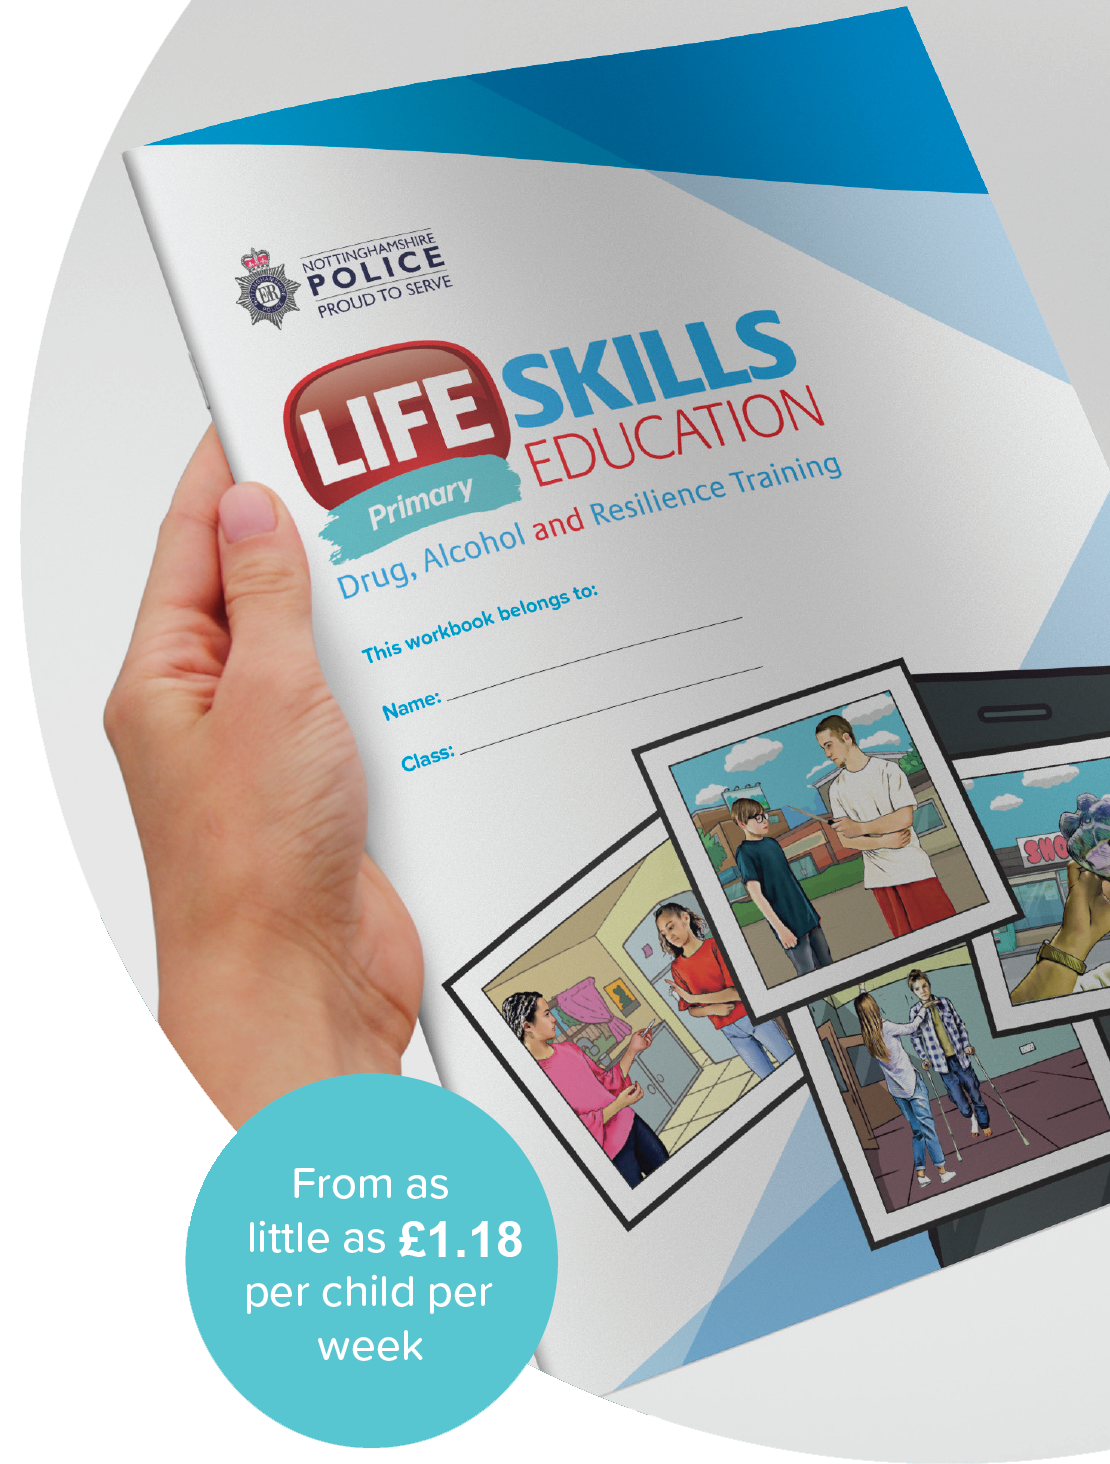 Life Skills Primary Programme - from as little as £1.18 per child per week.